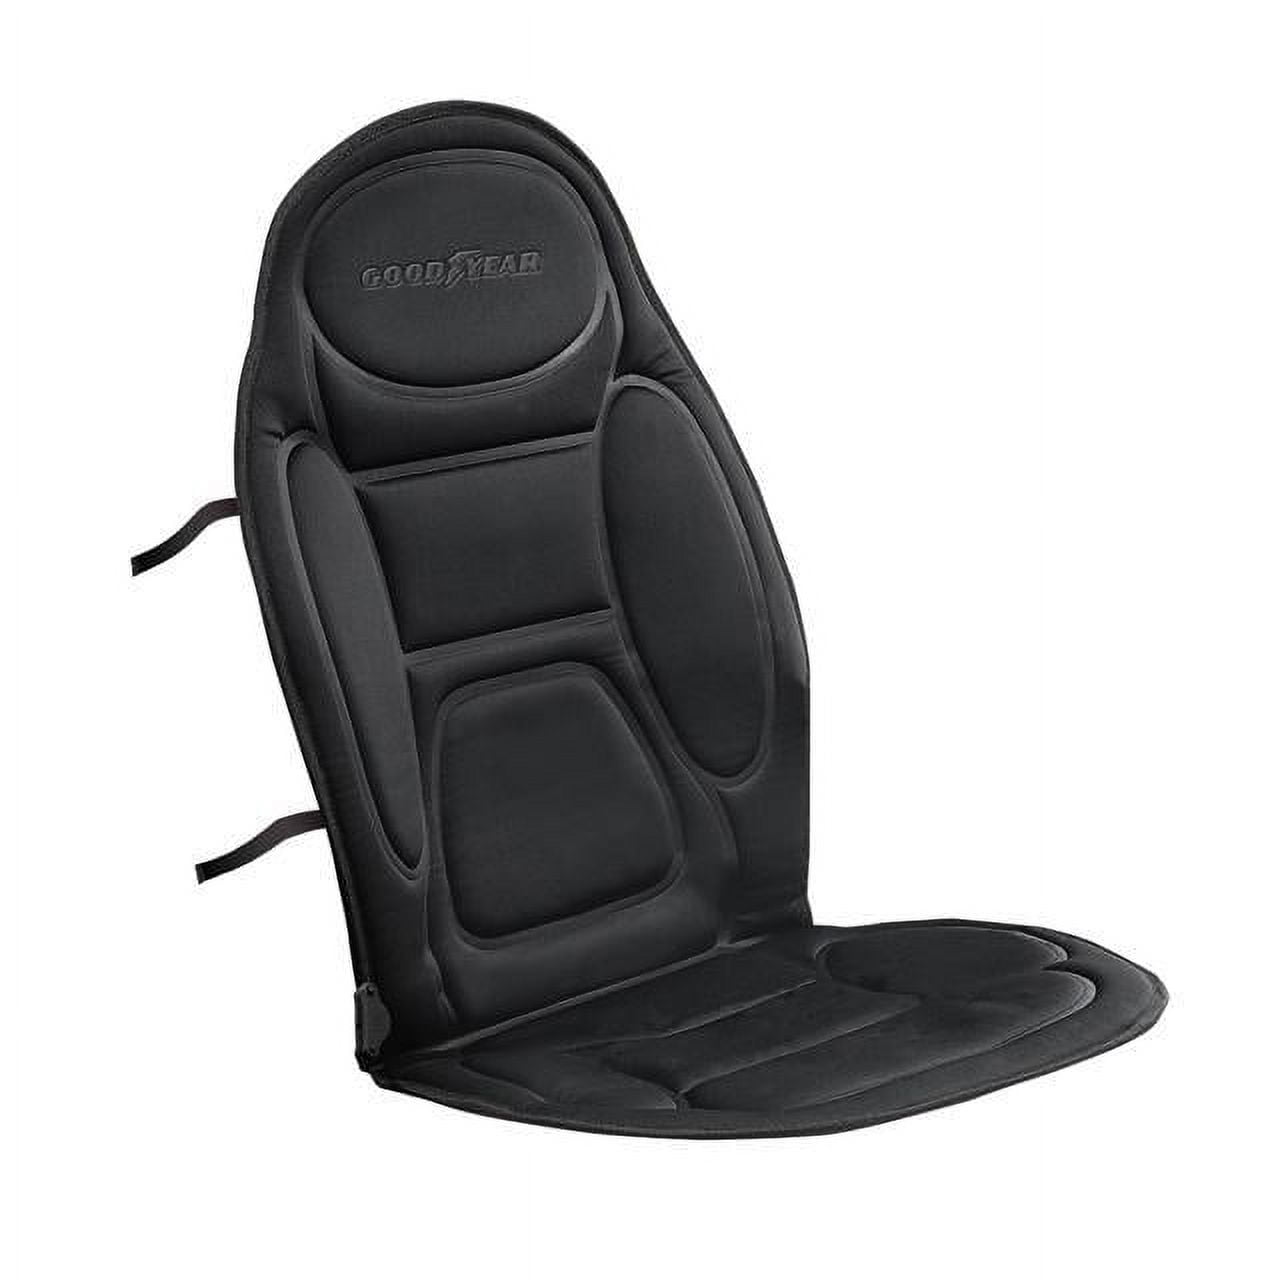 Best-Selling Car Seat Cushion on  Now 27% Off - GVS - Global